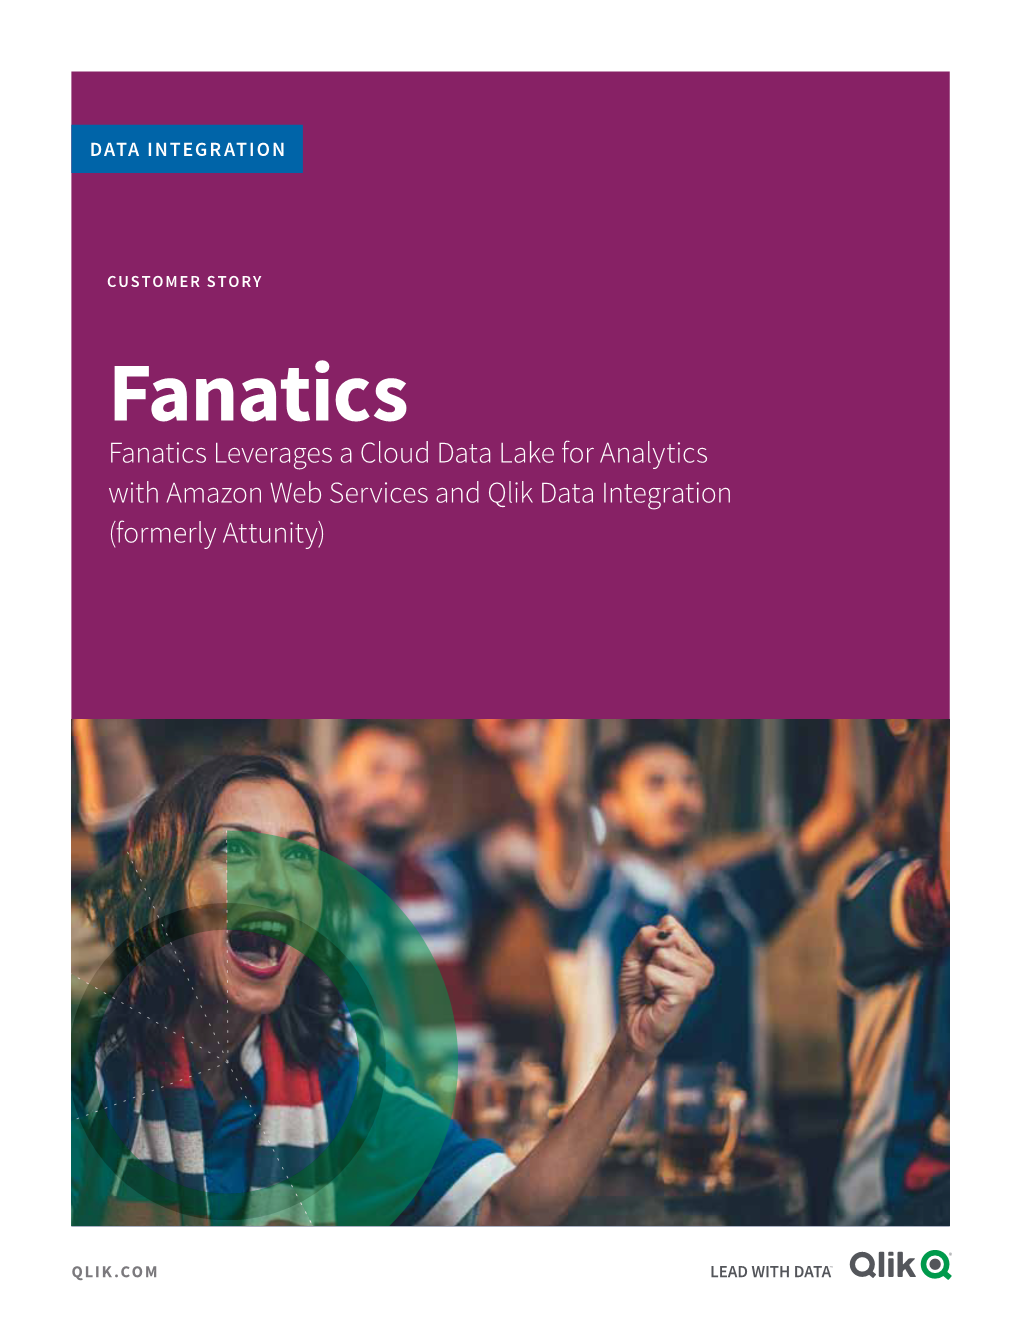 Fanatics Leverages a Cloud Data Lake for Analytics with Amazon Web Services and Qlik Data Integration (Formerly Attunity)